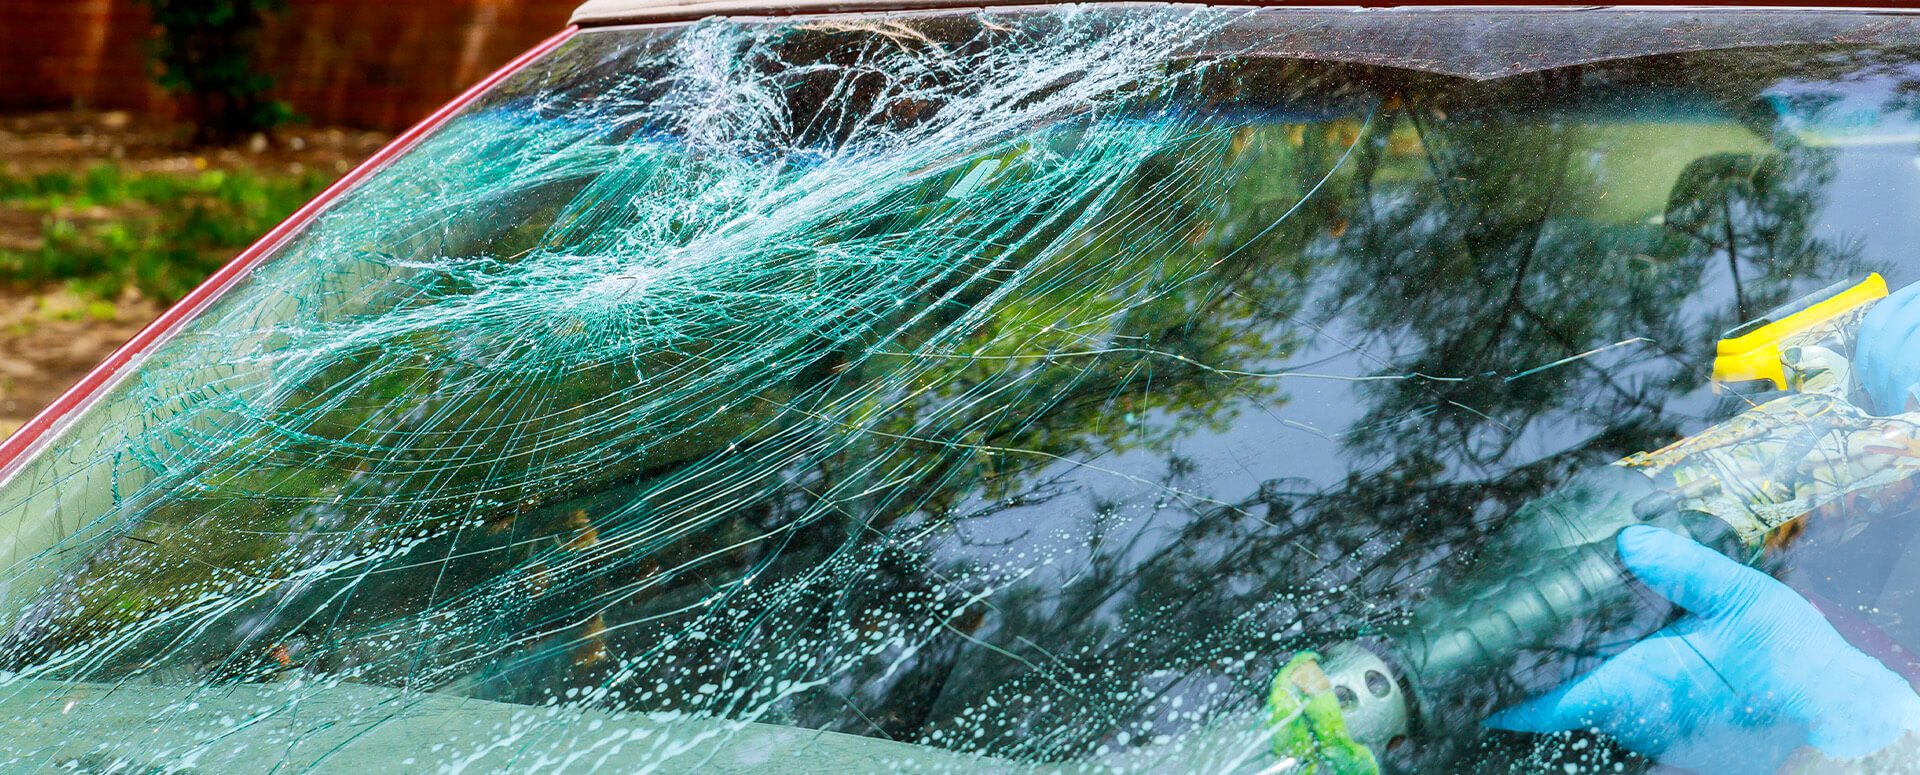 Mobile Auto Glass Replacement